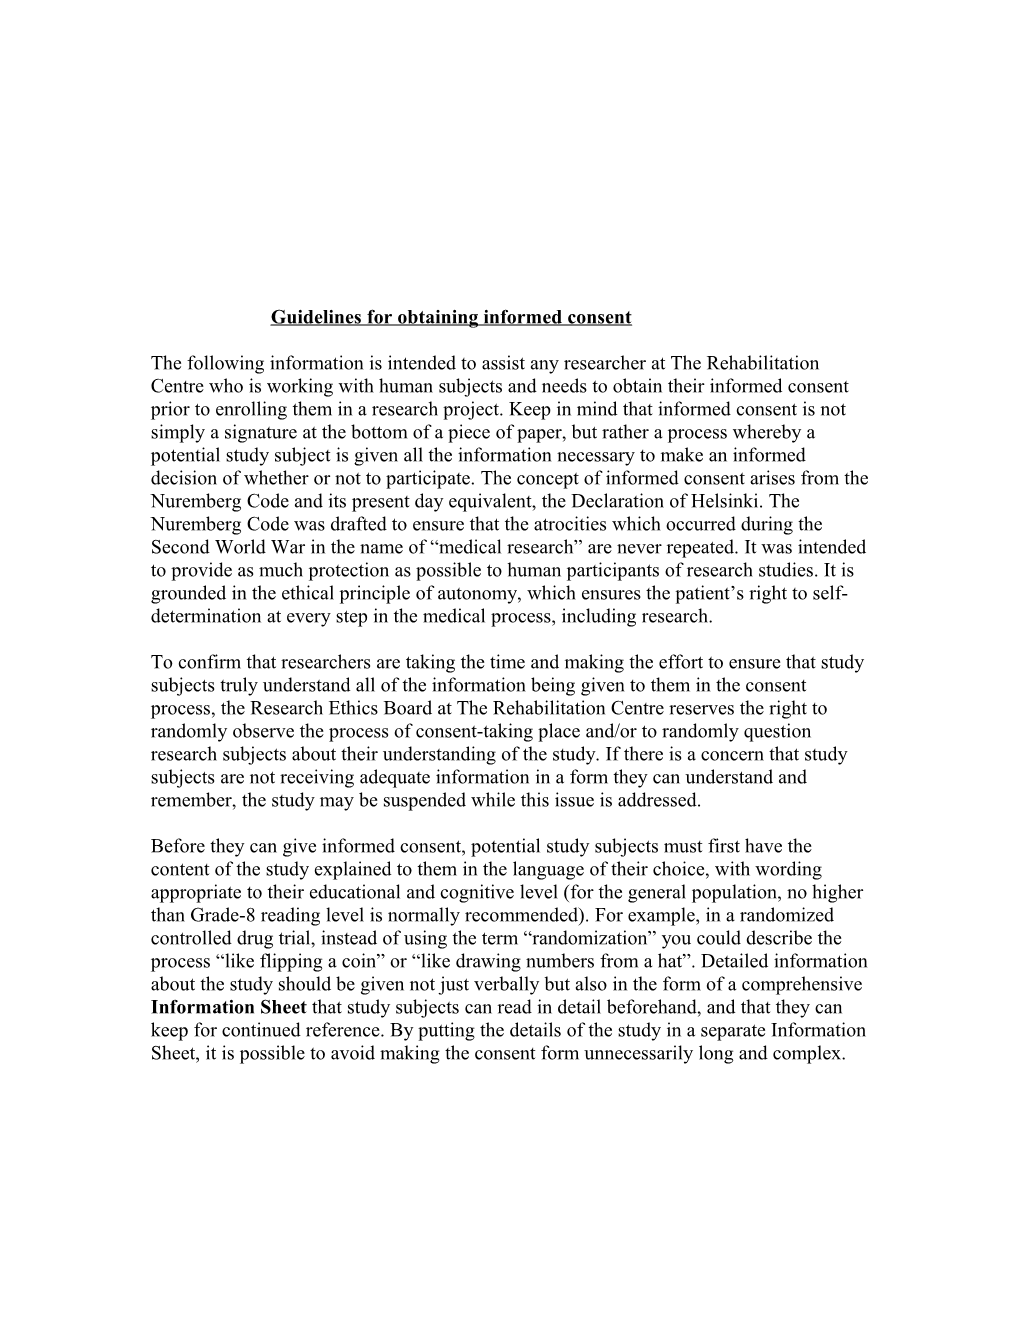 Outline for Researchers on Obtaining Informed Consent from Potential Study Participants